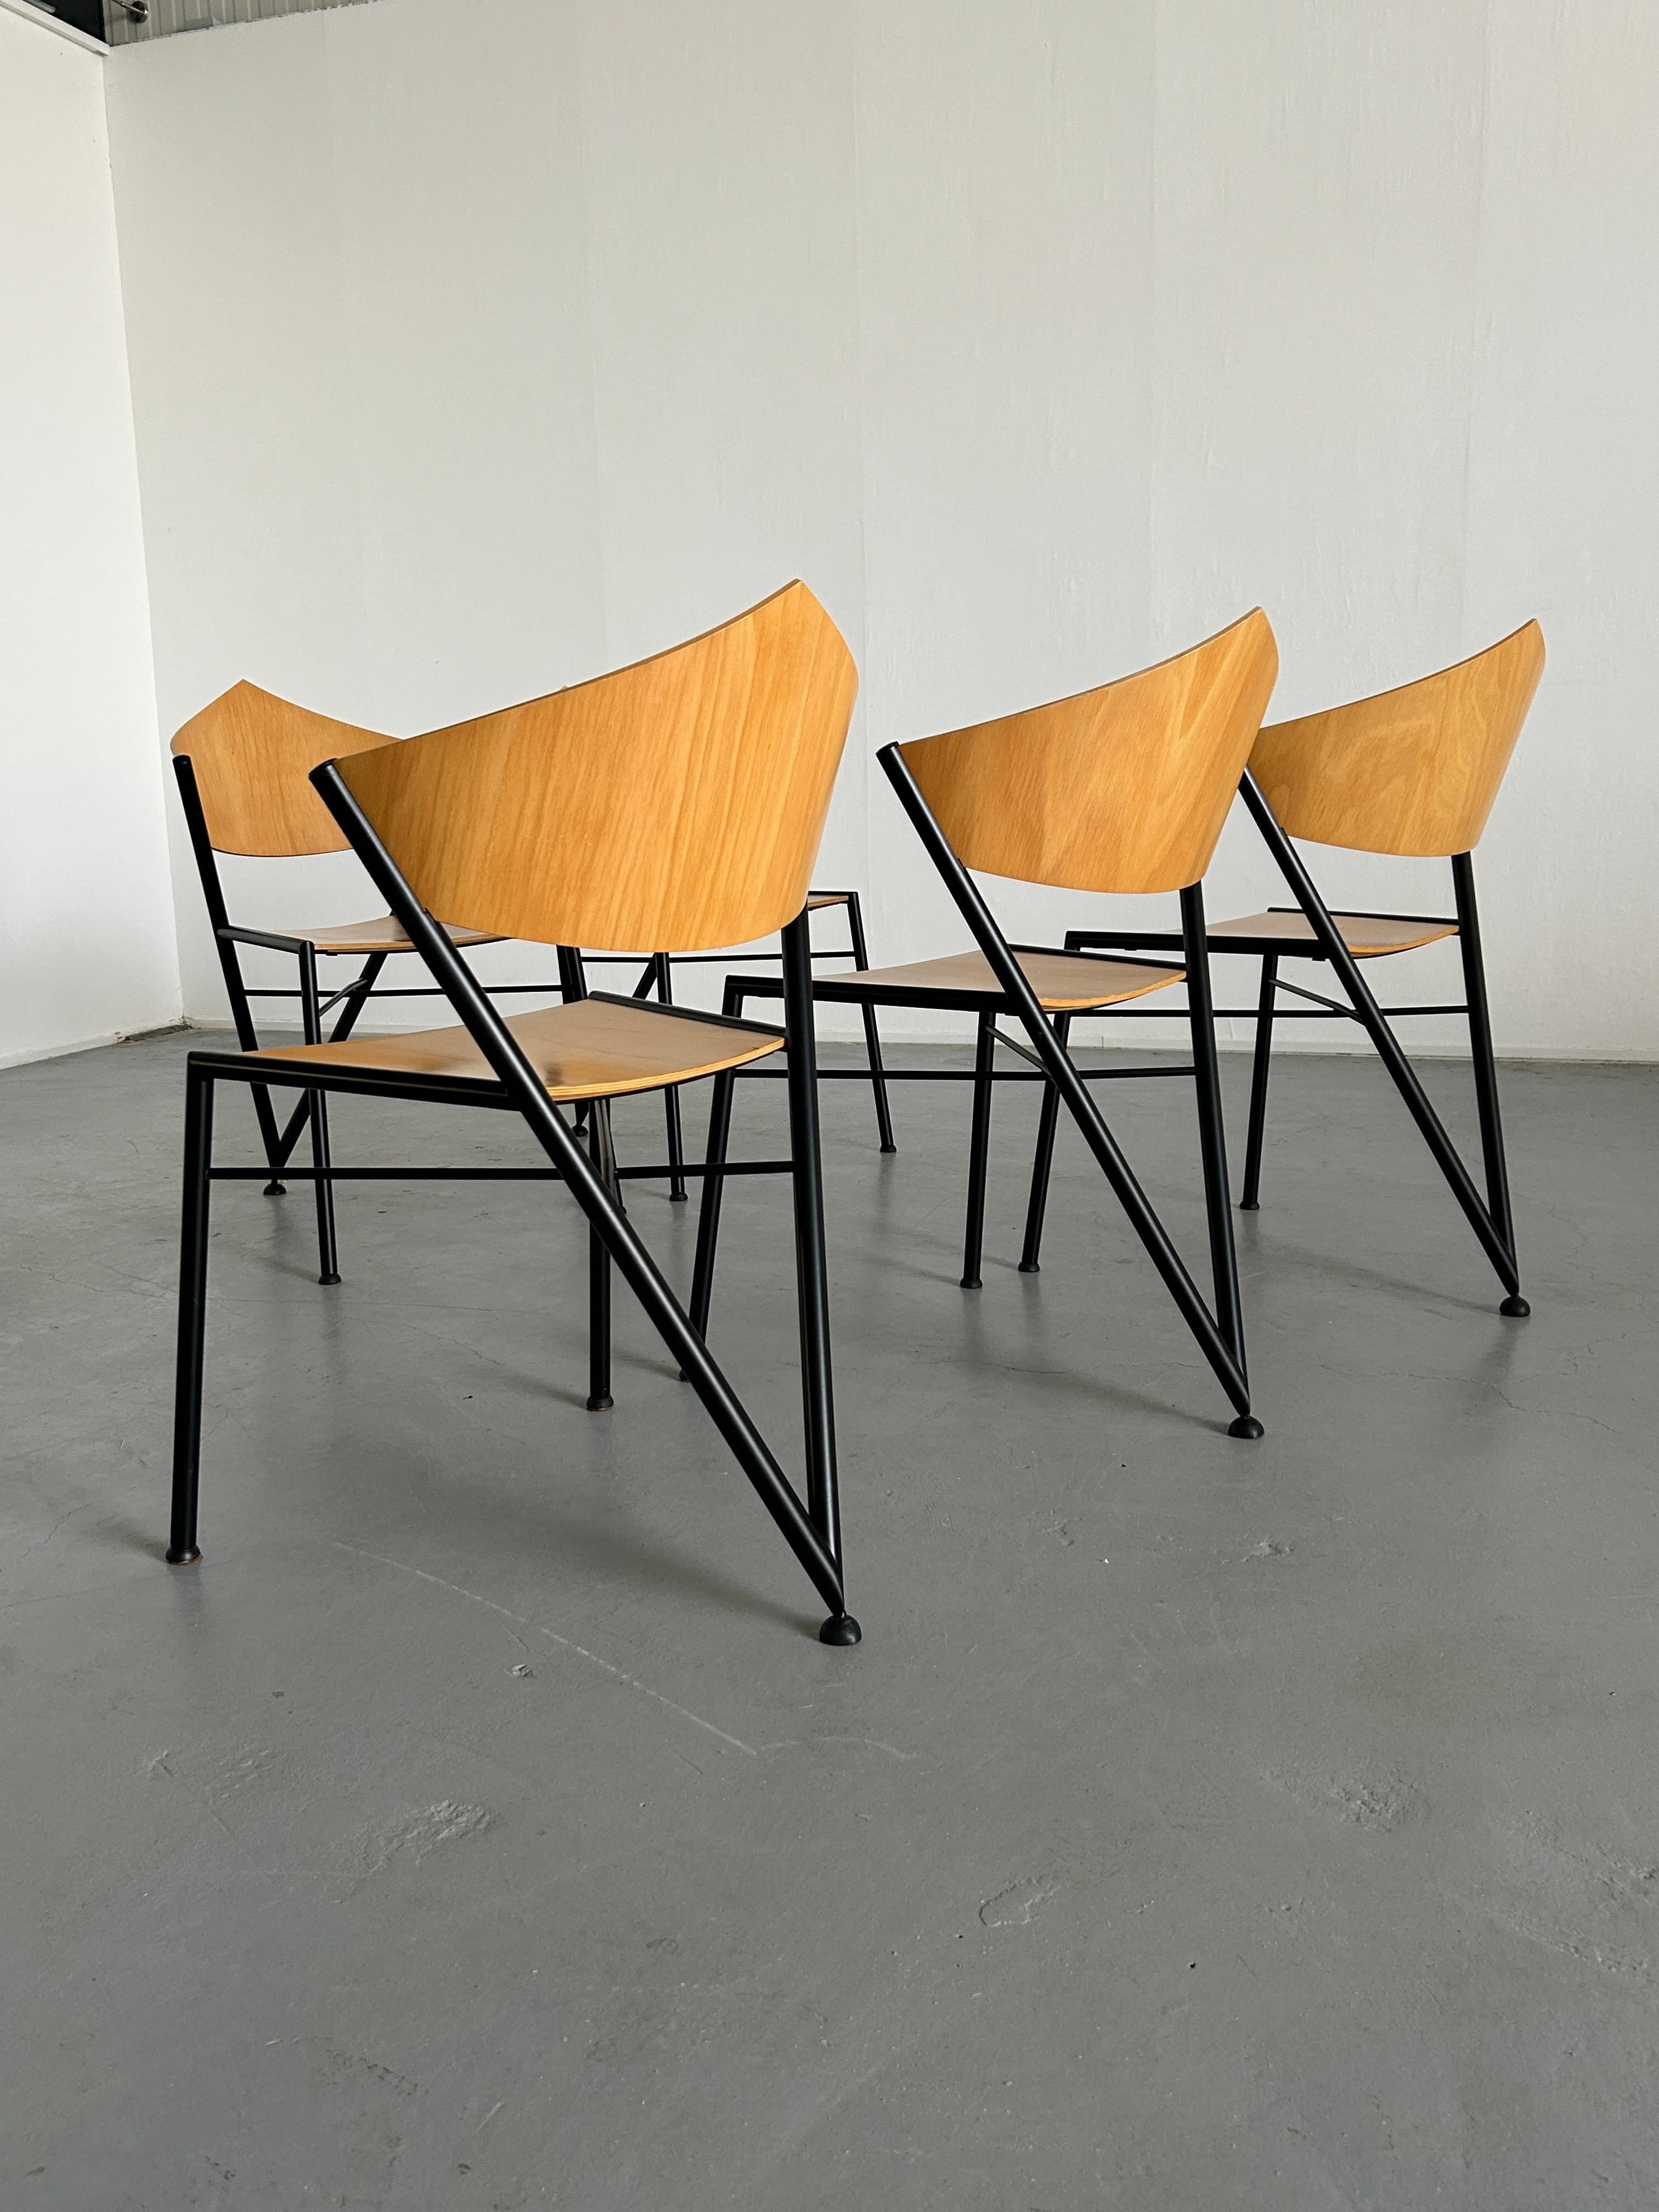 1 of 6 Postmodern Metal Framed Plywood Chairs, Memphis Design, 1980s Italy 3